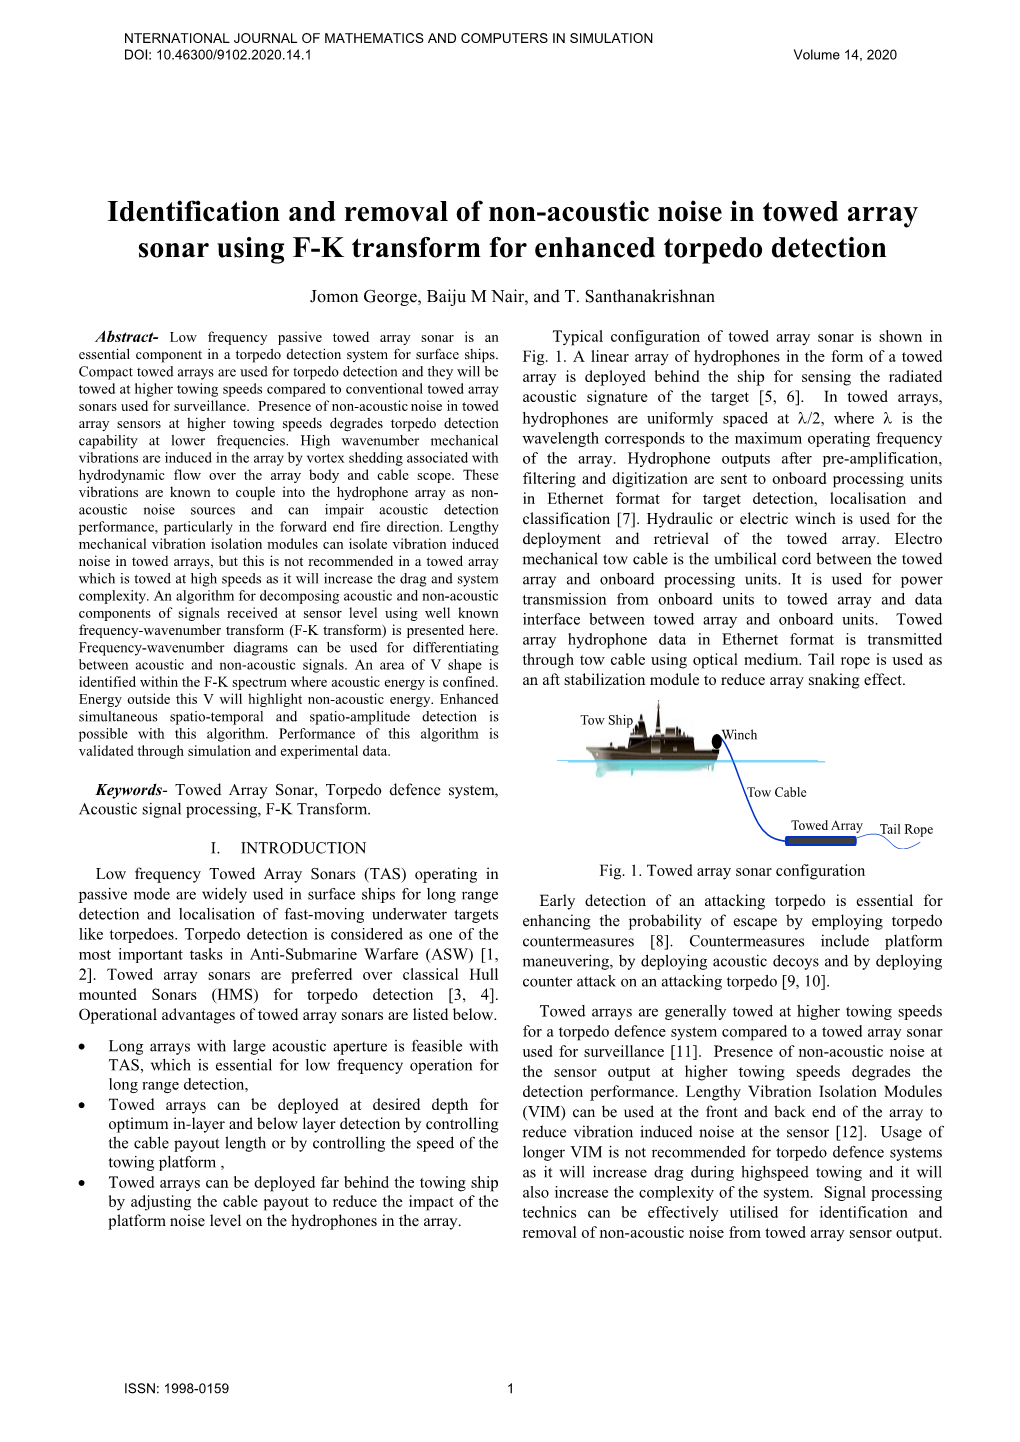 Identification and Removal of Non-Acoustic Noise in Towed Array Sonar Using F-K Transform for Enhanced Torpedo Detection